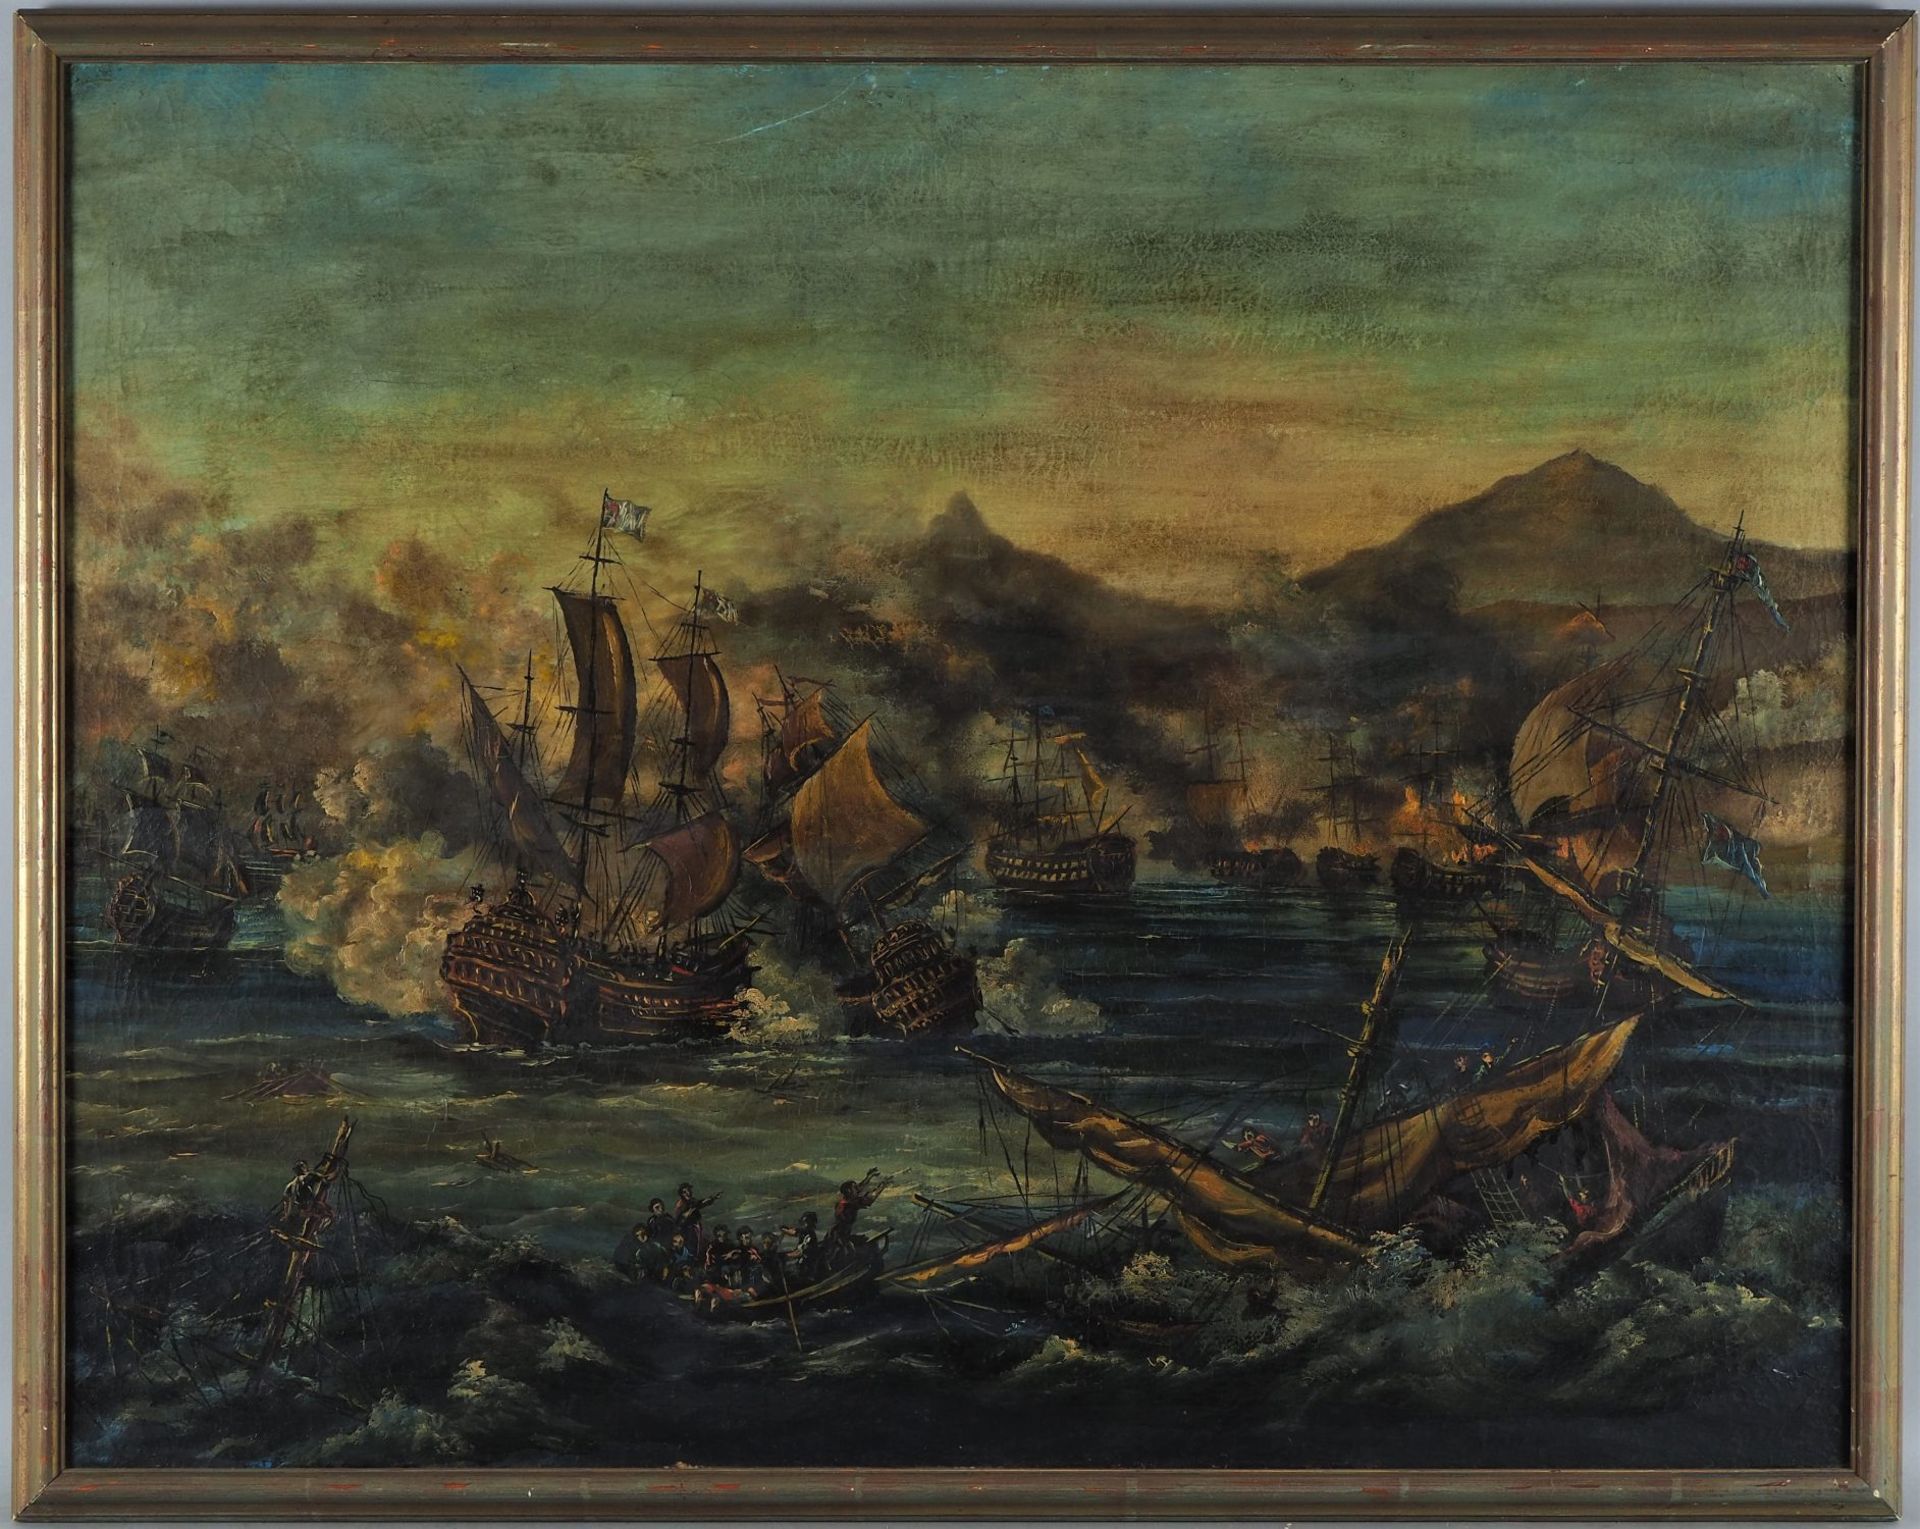 Painting Sea Battle, after old master, 19th century.